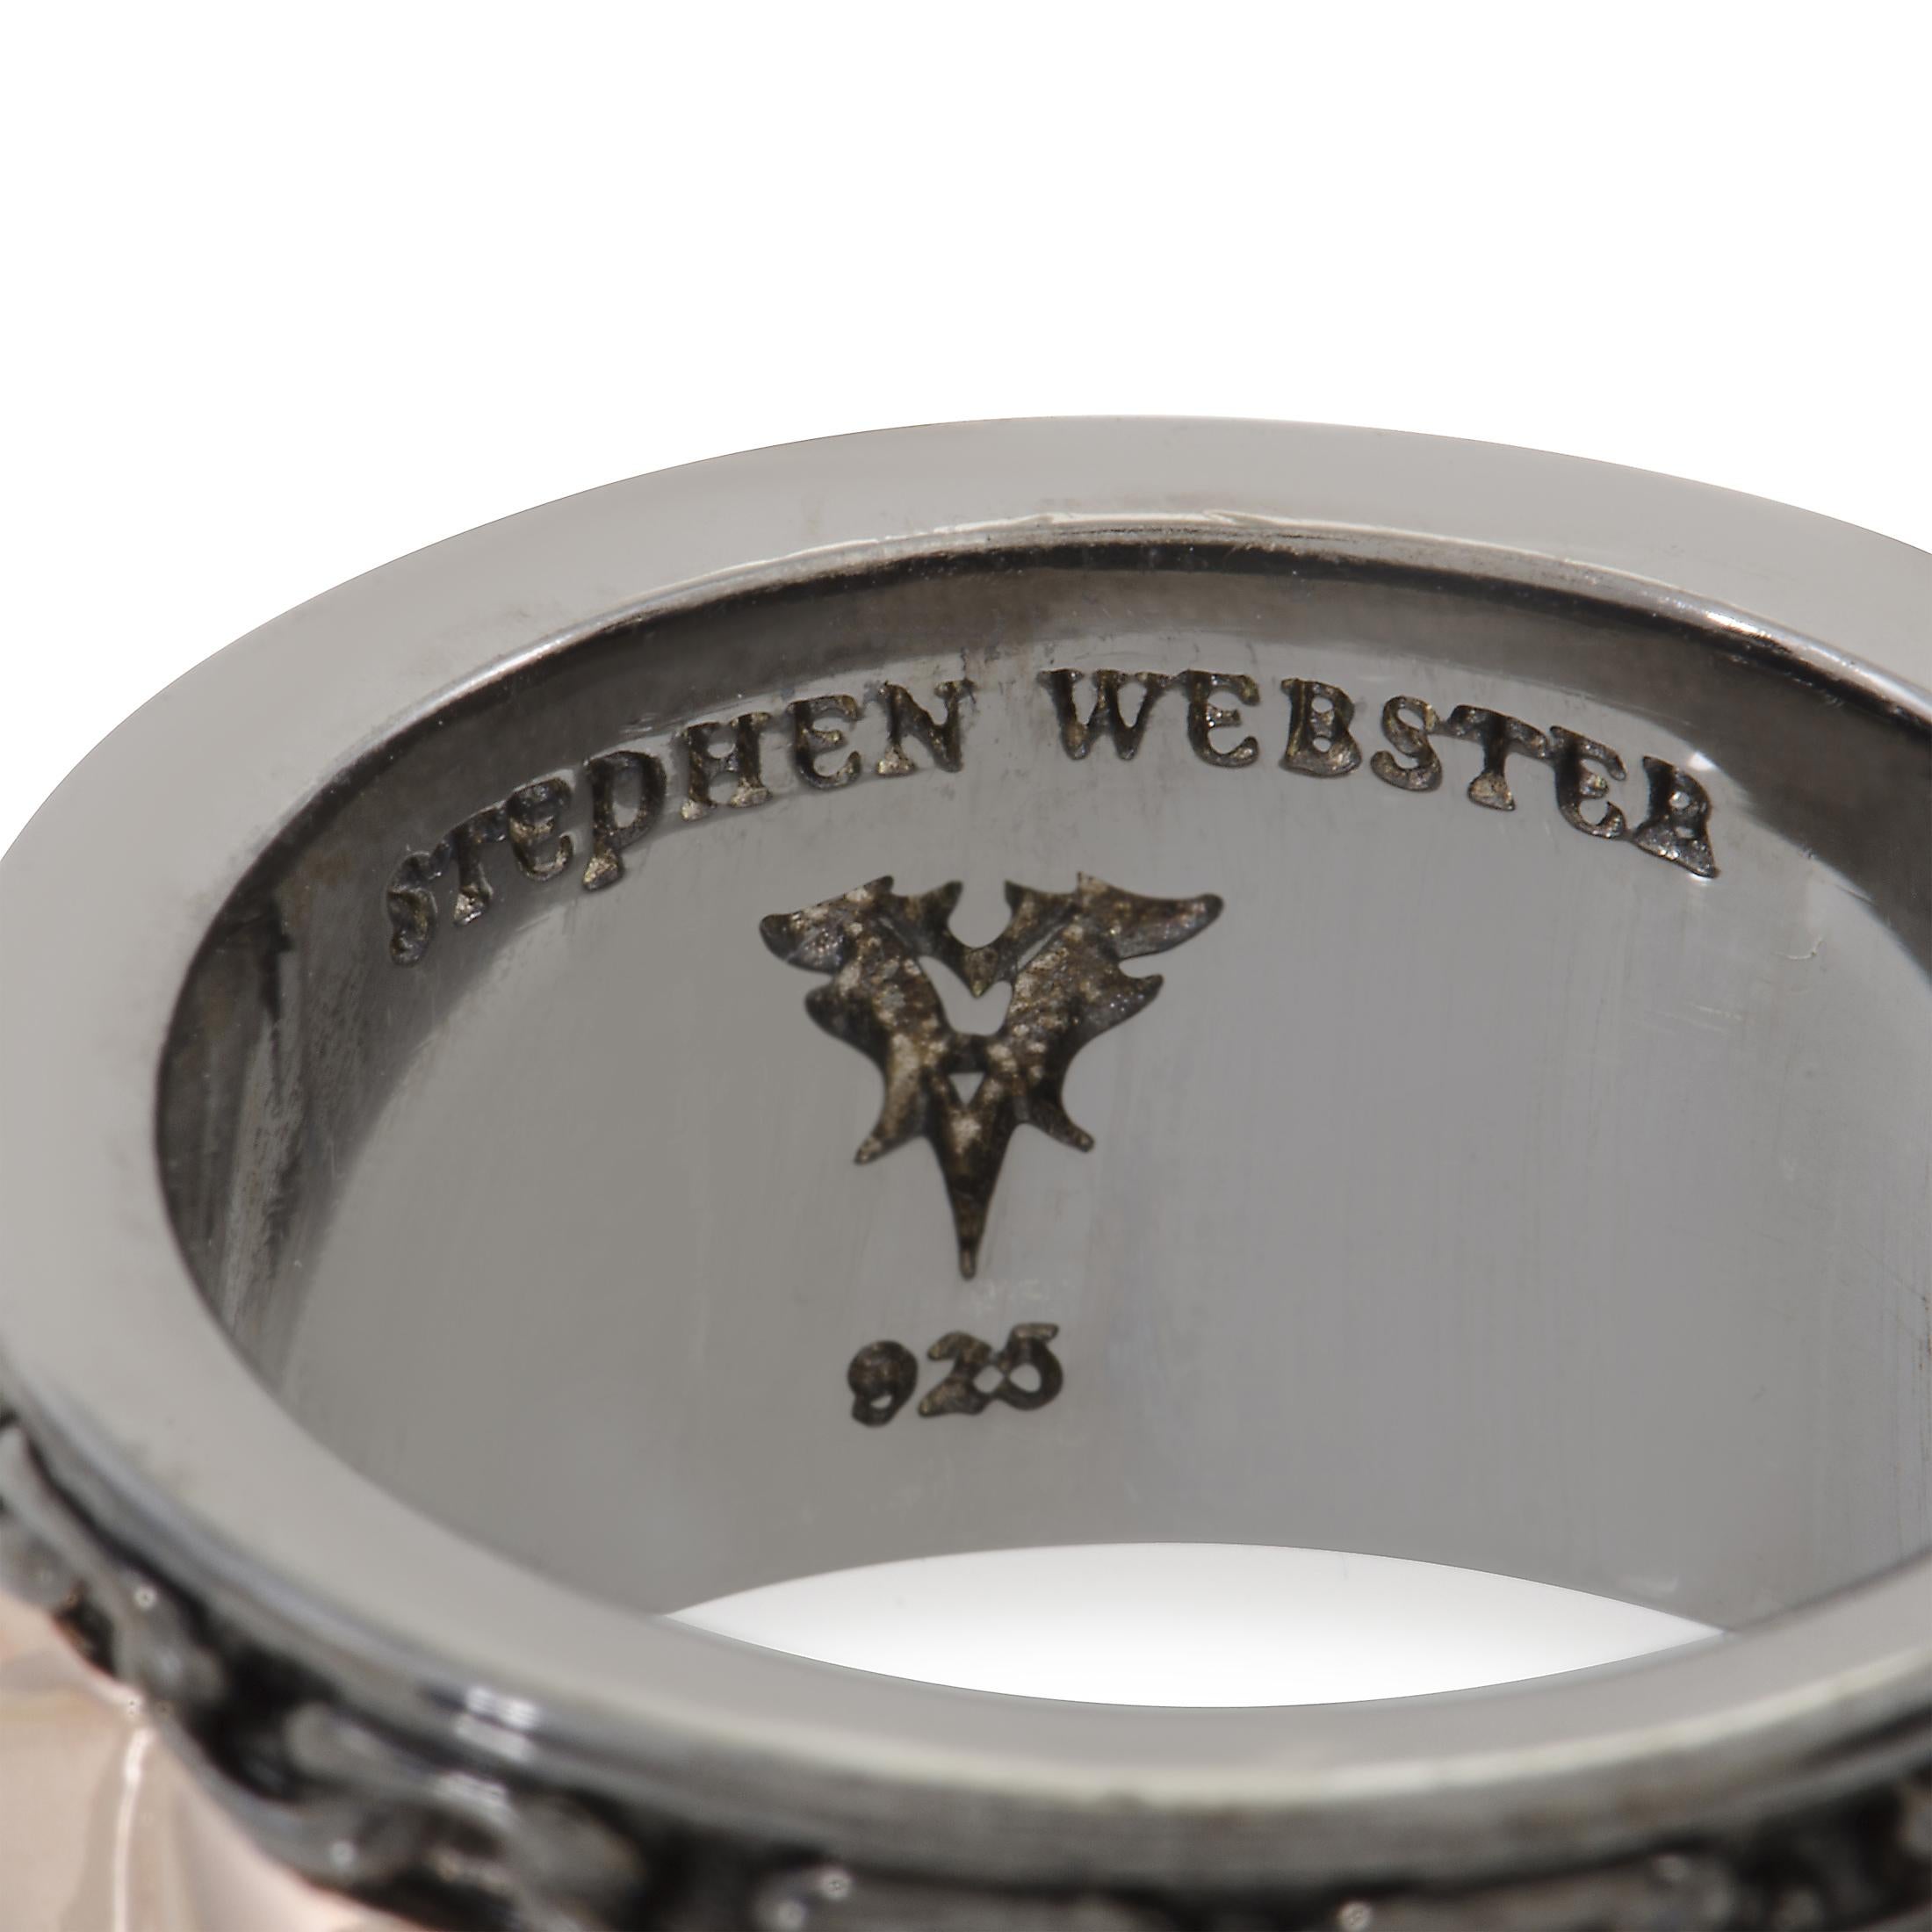 Stephen Webster Alchemy in the UK Men's Rose Gold Plated Silver Band Ring 1